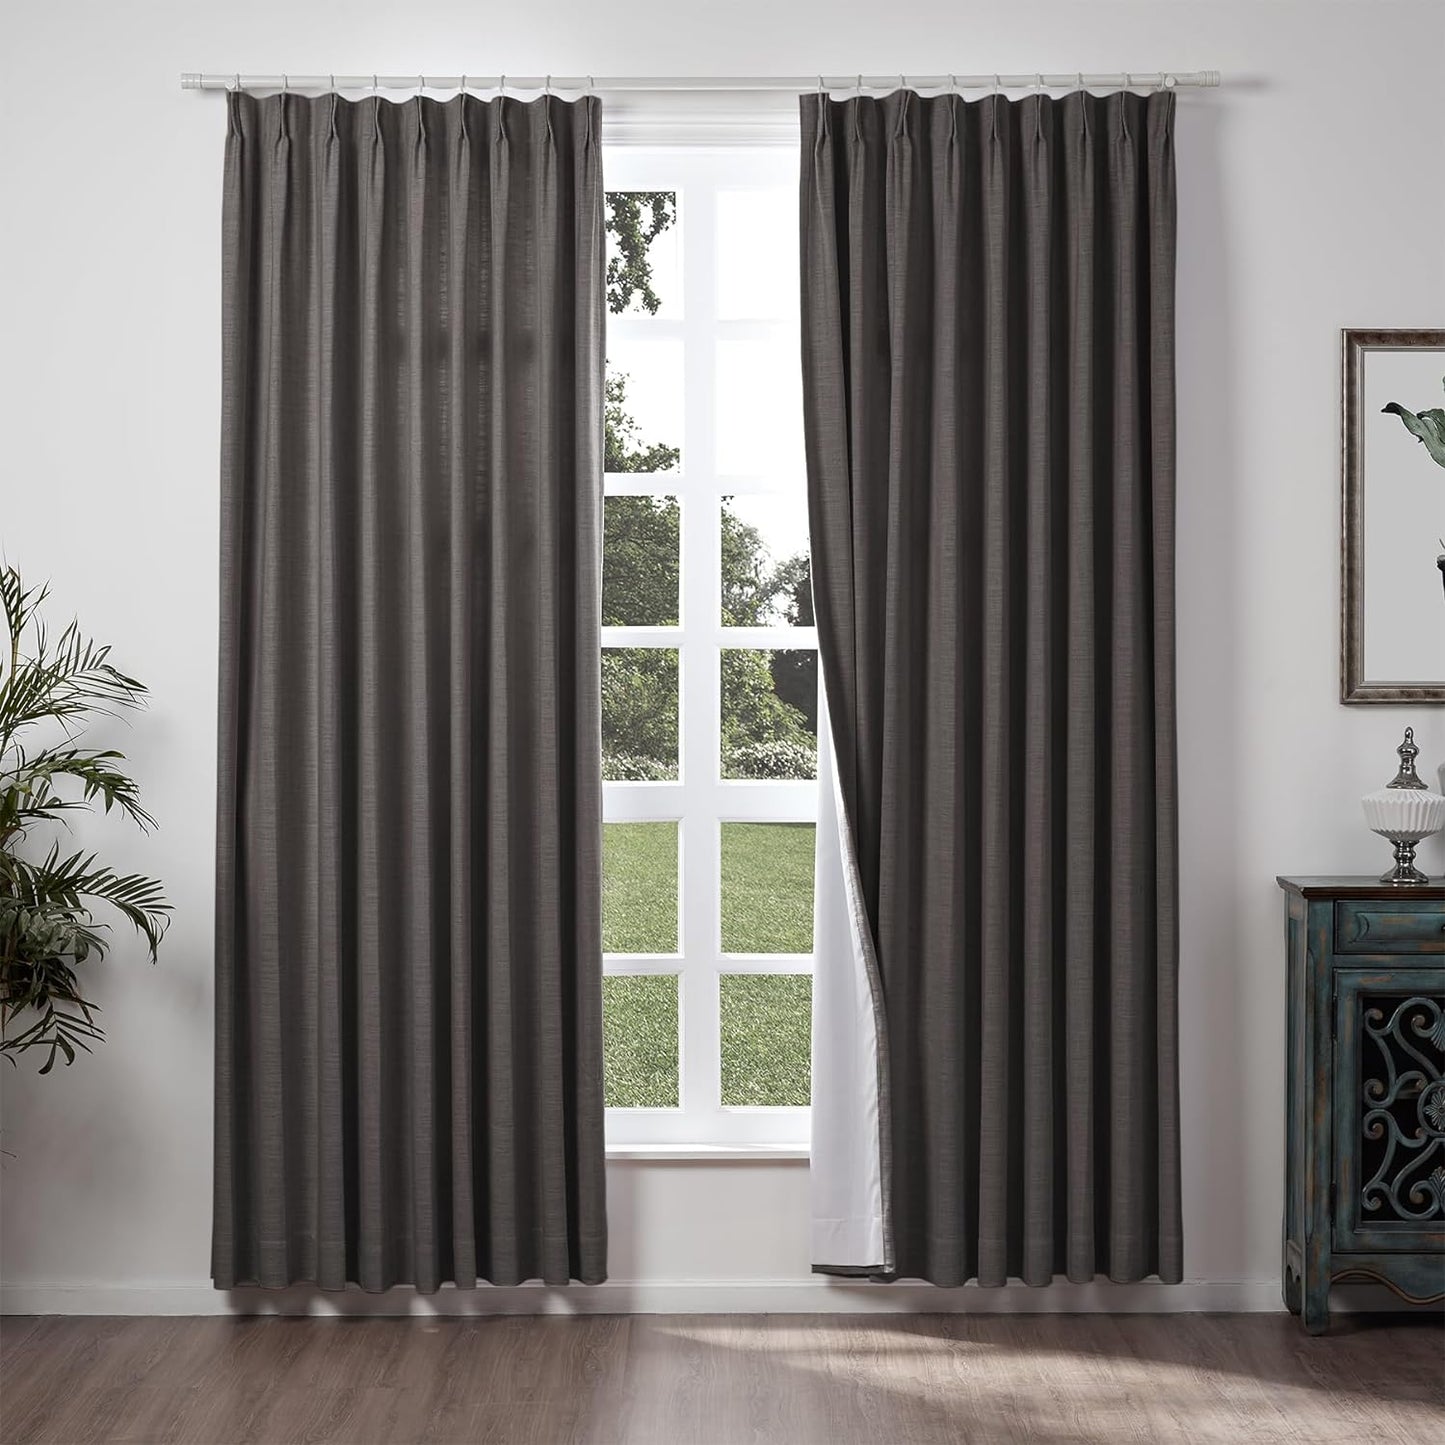 Chadmade 50" W X 84" L Polyester Linen Drape with Blackout Lining Pinch Pleat Curtain for Sliding Door Patio Door Living Room Bedroom, (1 Panel) Beige White Liz Collection  ChadMade Chocolate Tart (13) 50Wx96L 